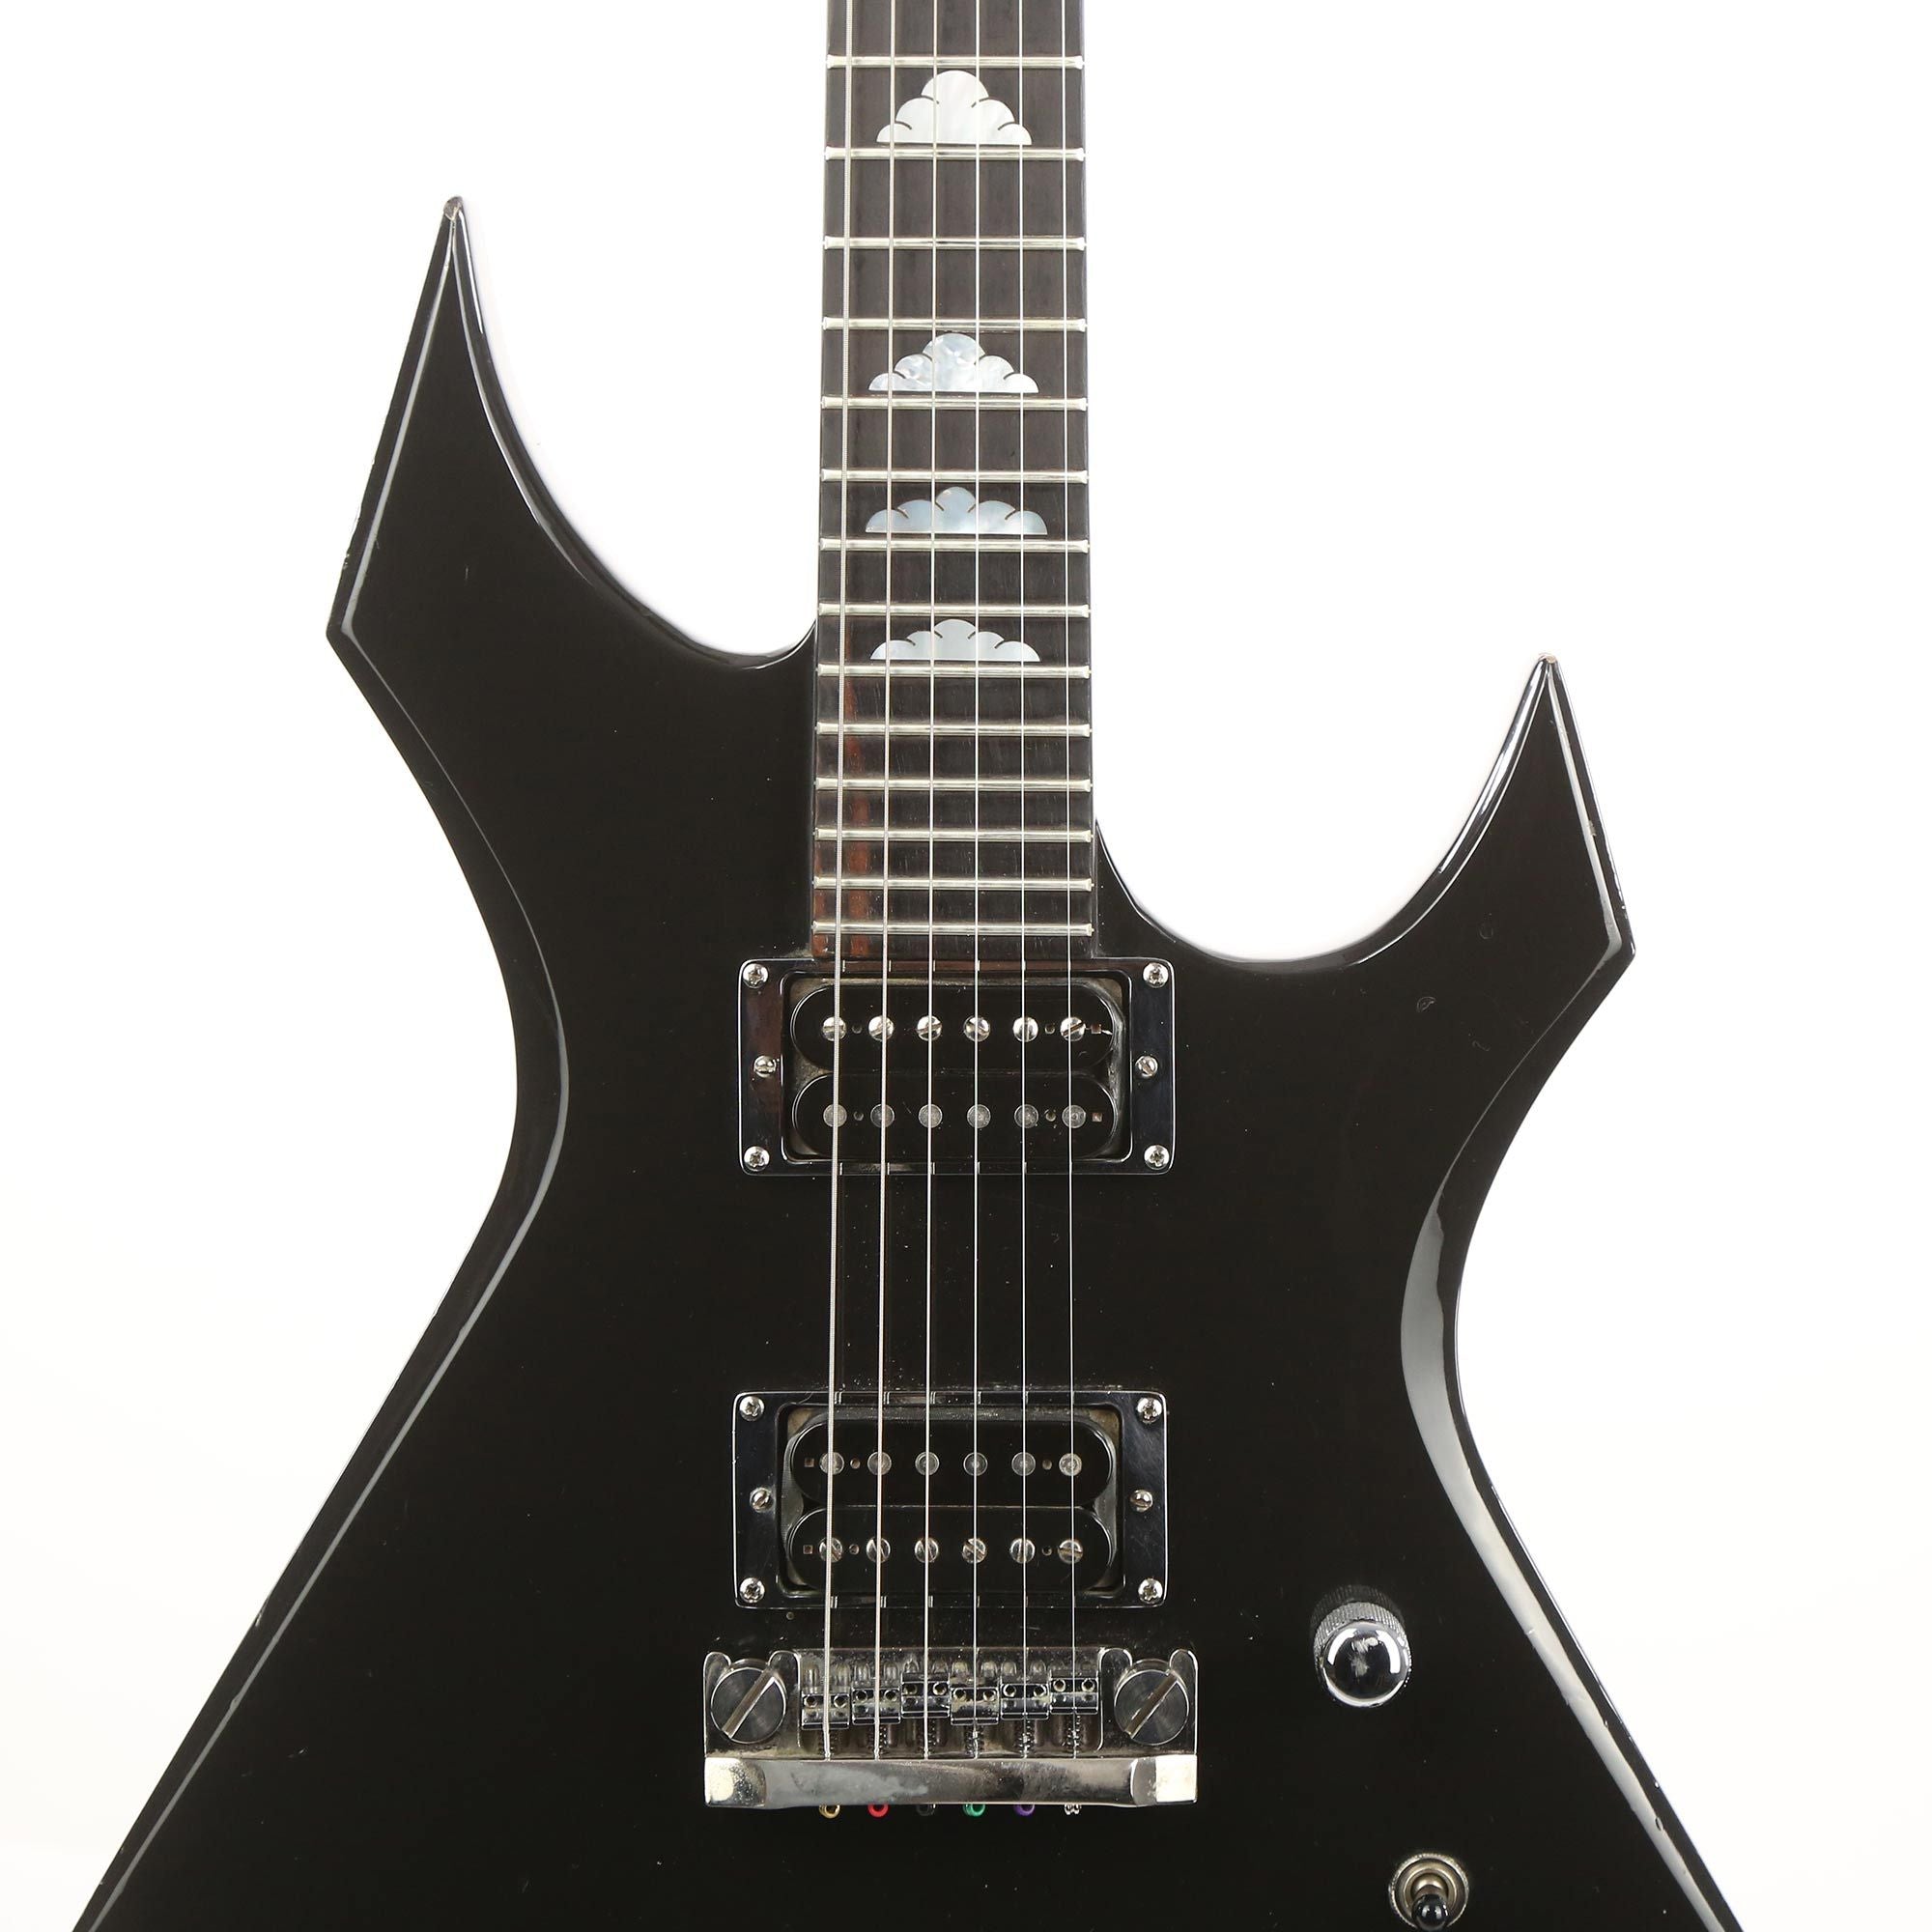 BC Rich Warlock Deluxe Black 1984 | The Music Zoo